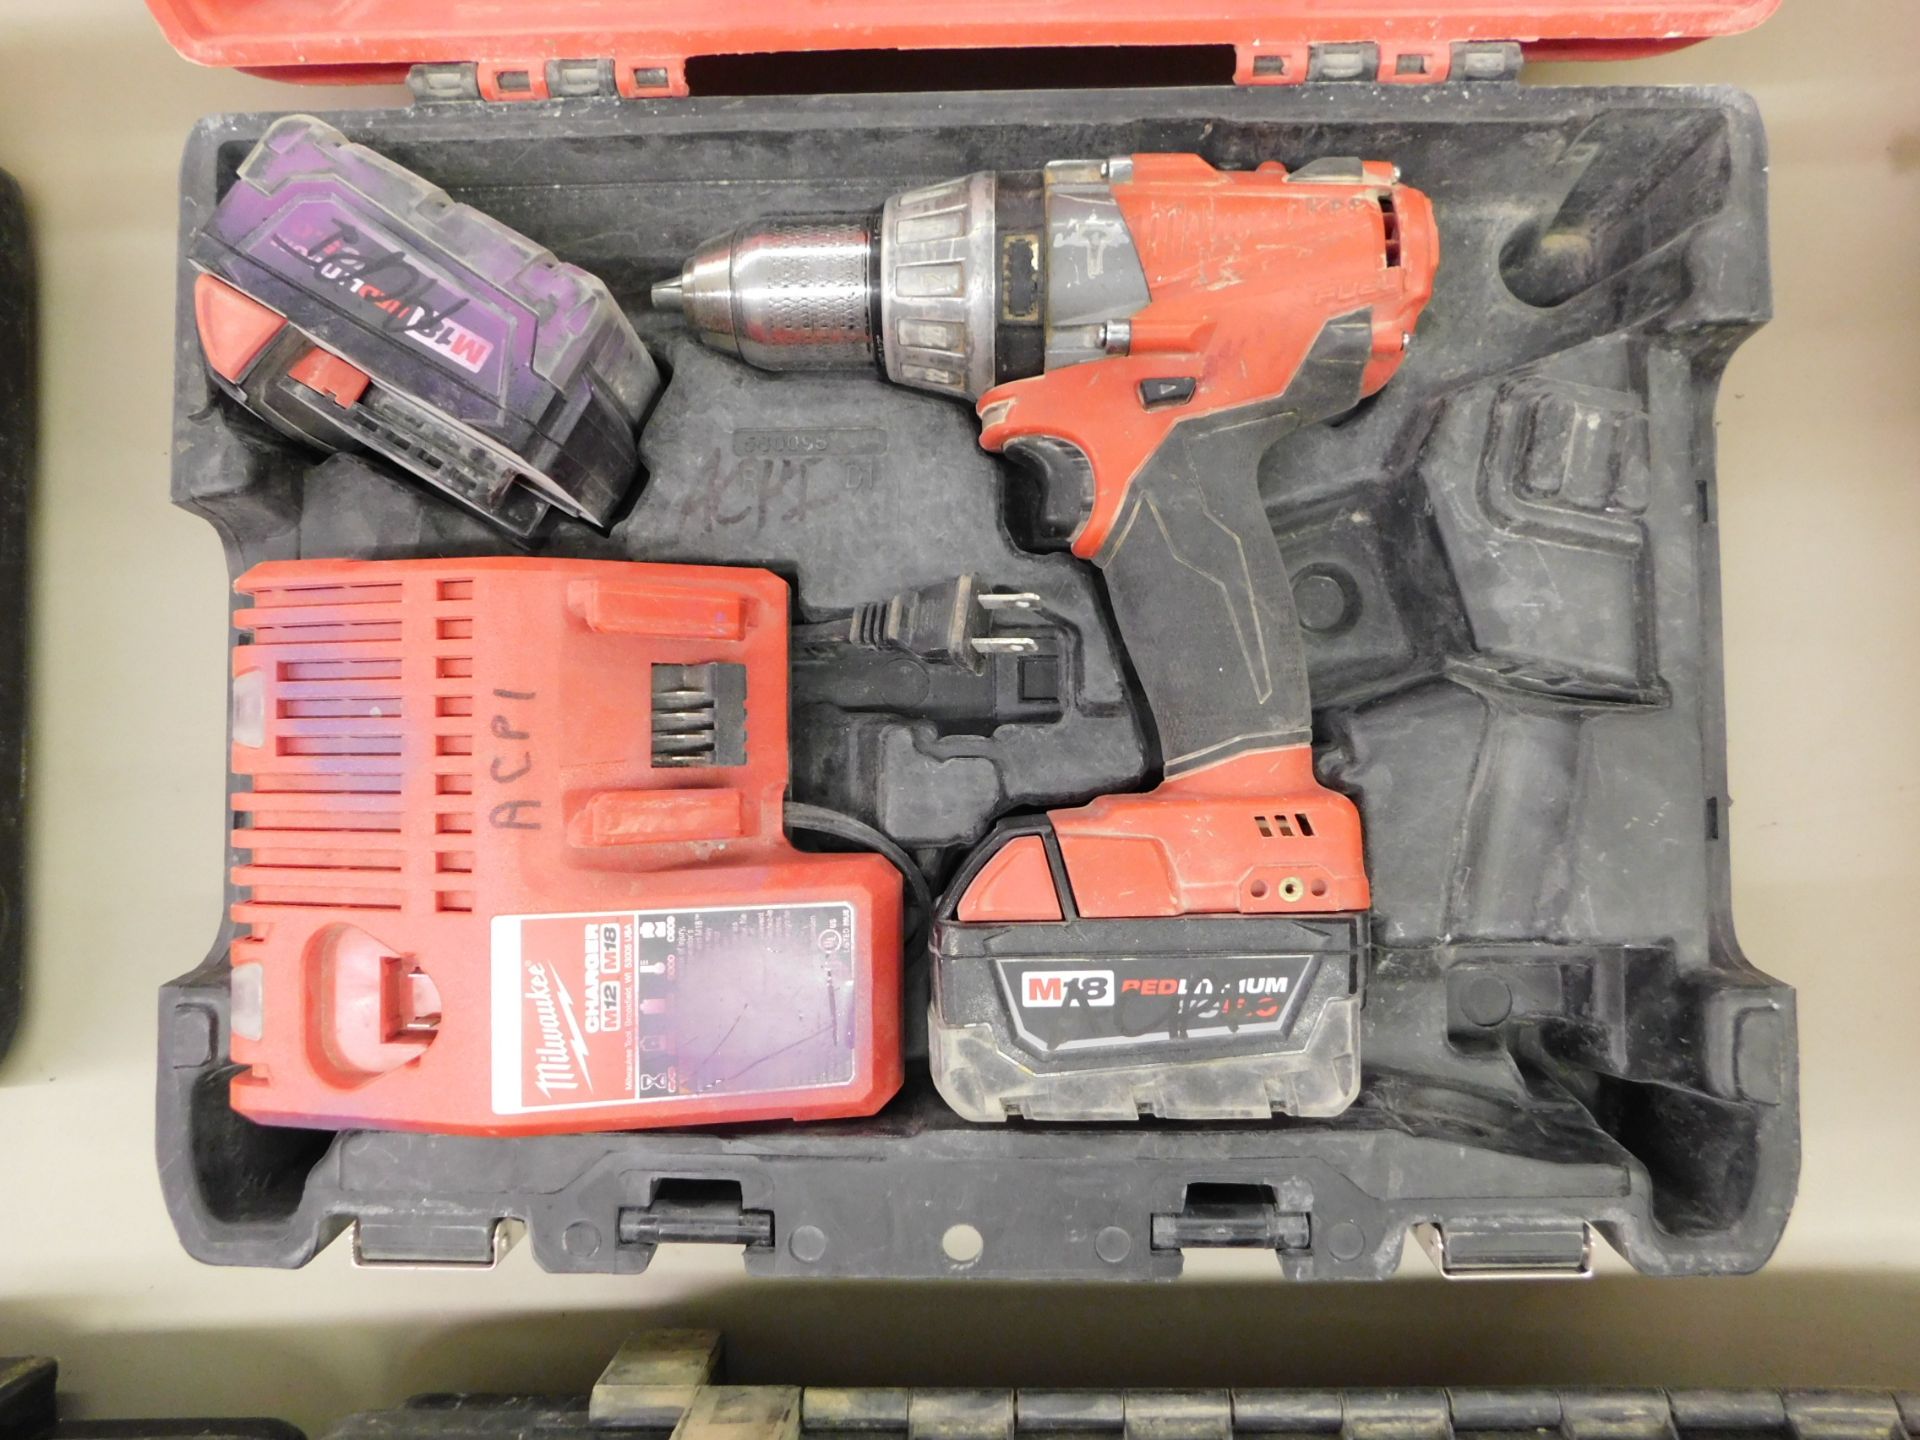 Milwaukee Model 2604-20 18V Cordless Drill with Batteries and Charger